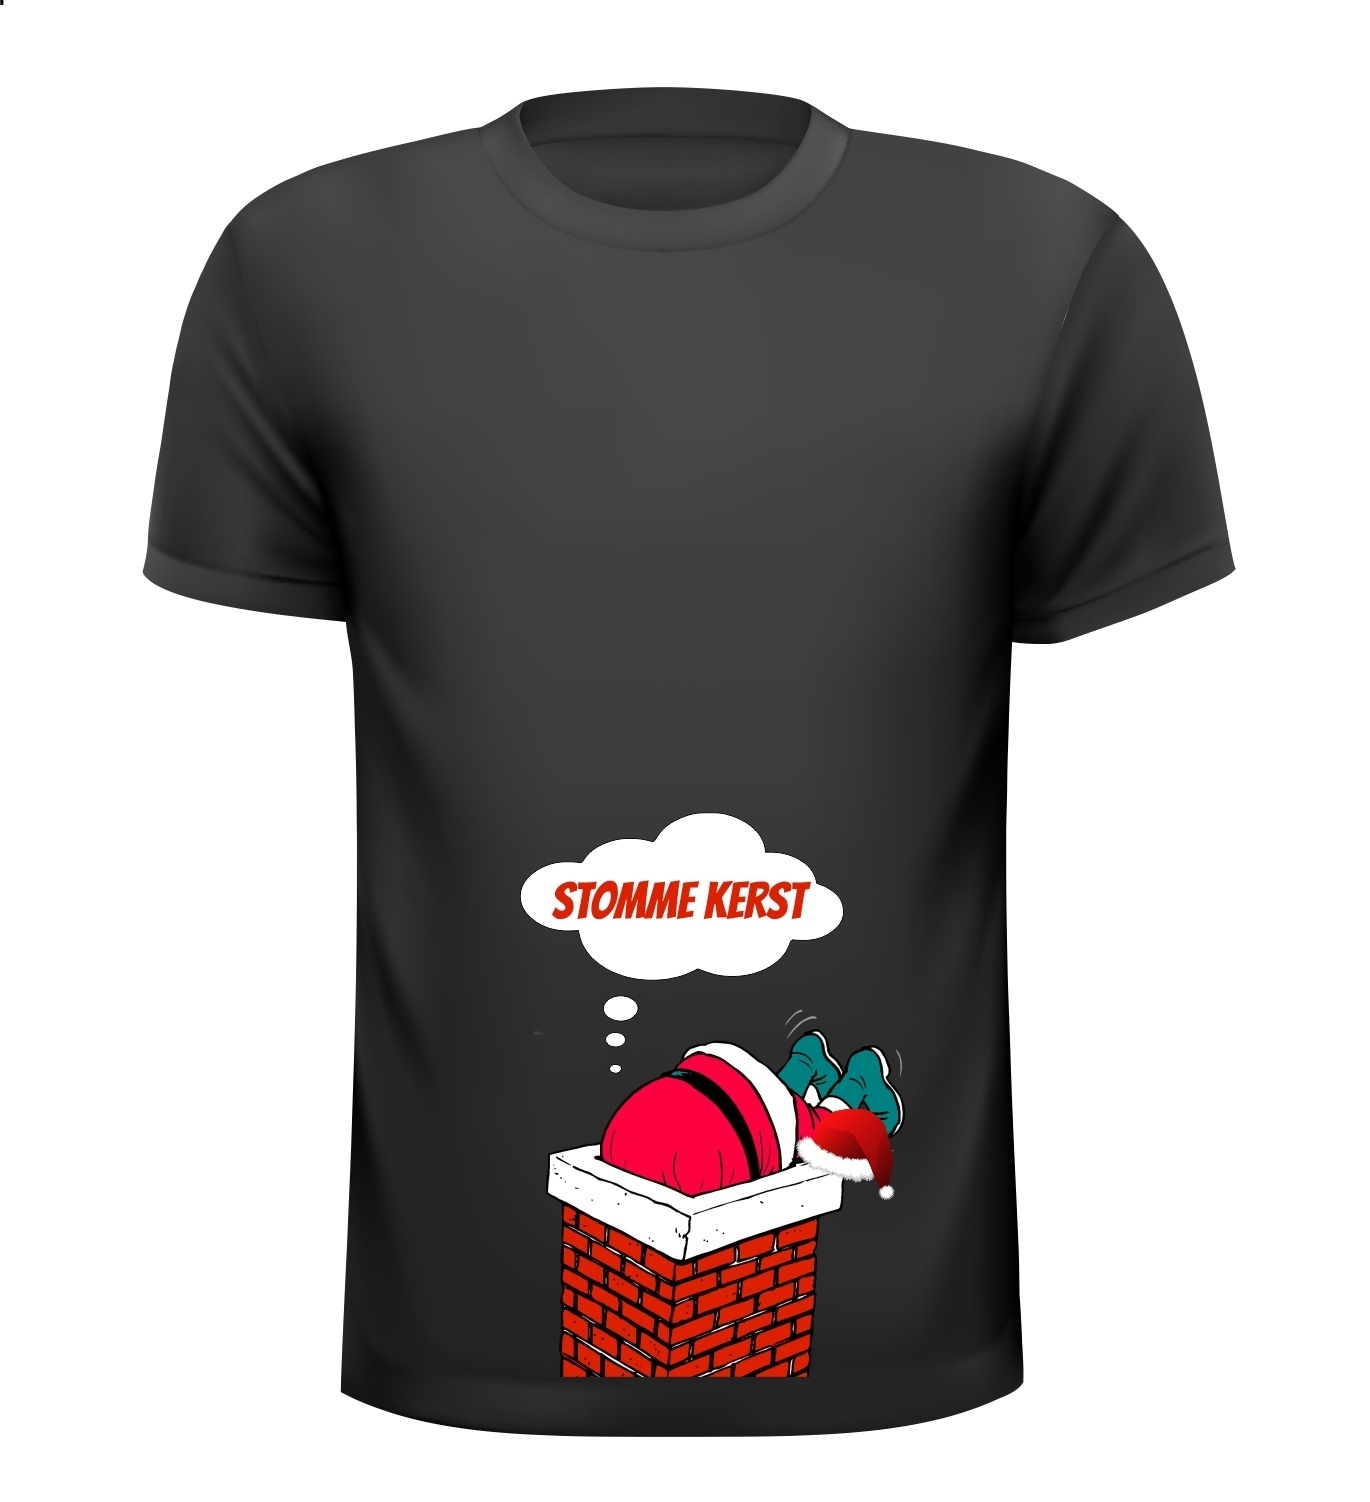 stomme kerst T-shirt